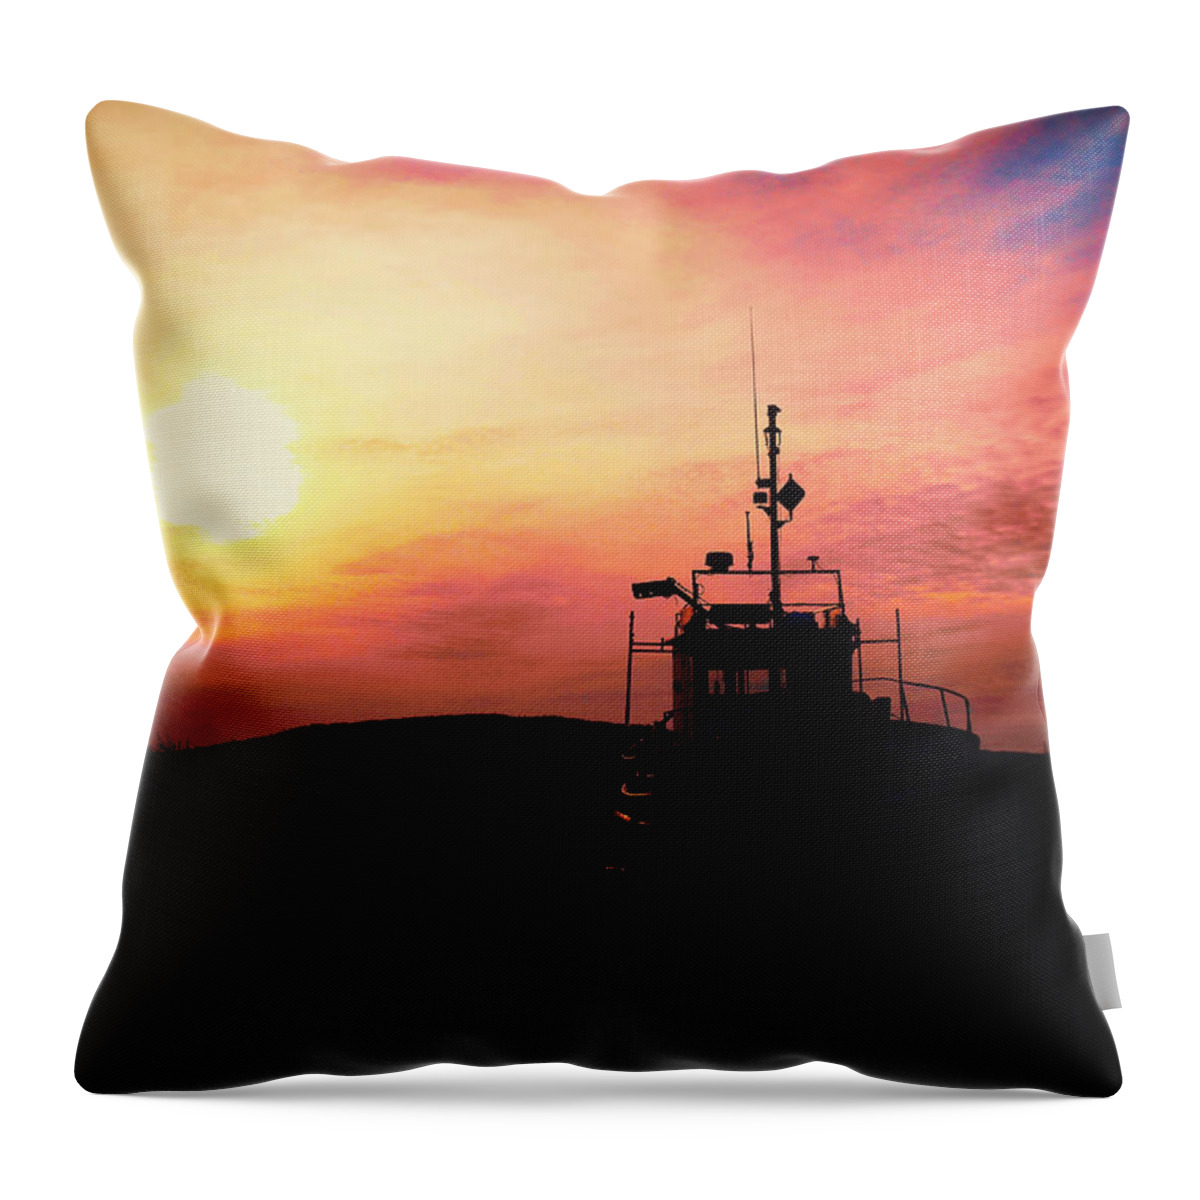 Sunset Throw Pillow featuring the photograph Sail At Sunset by Zinvolle Art